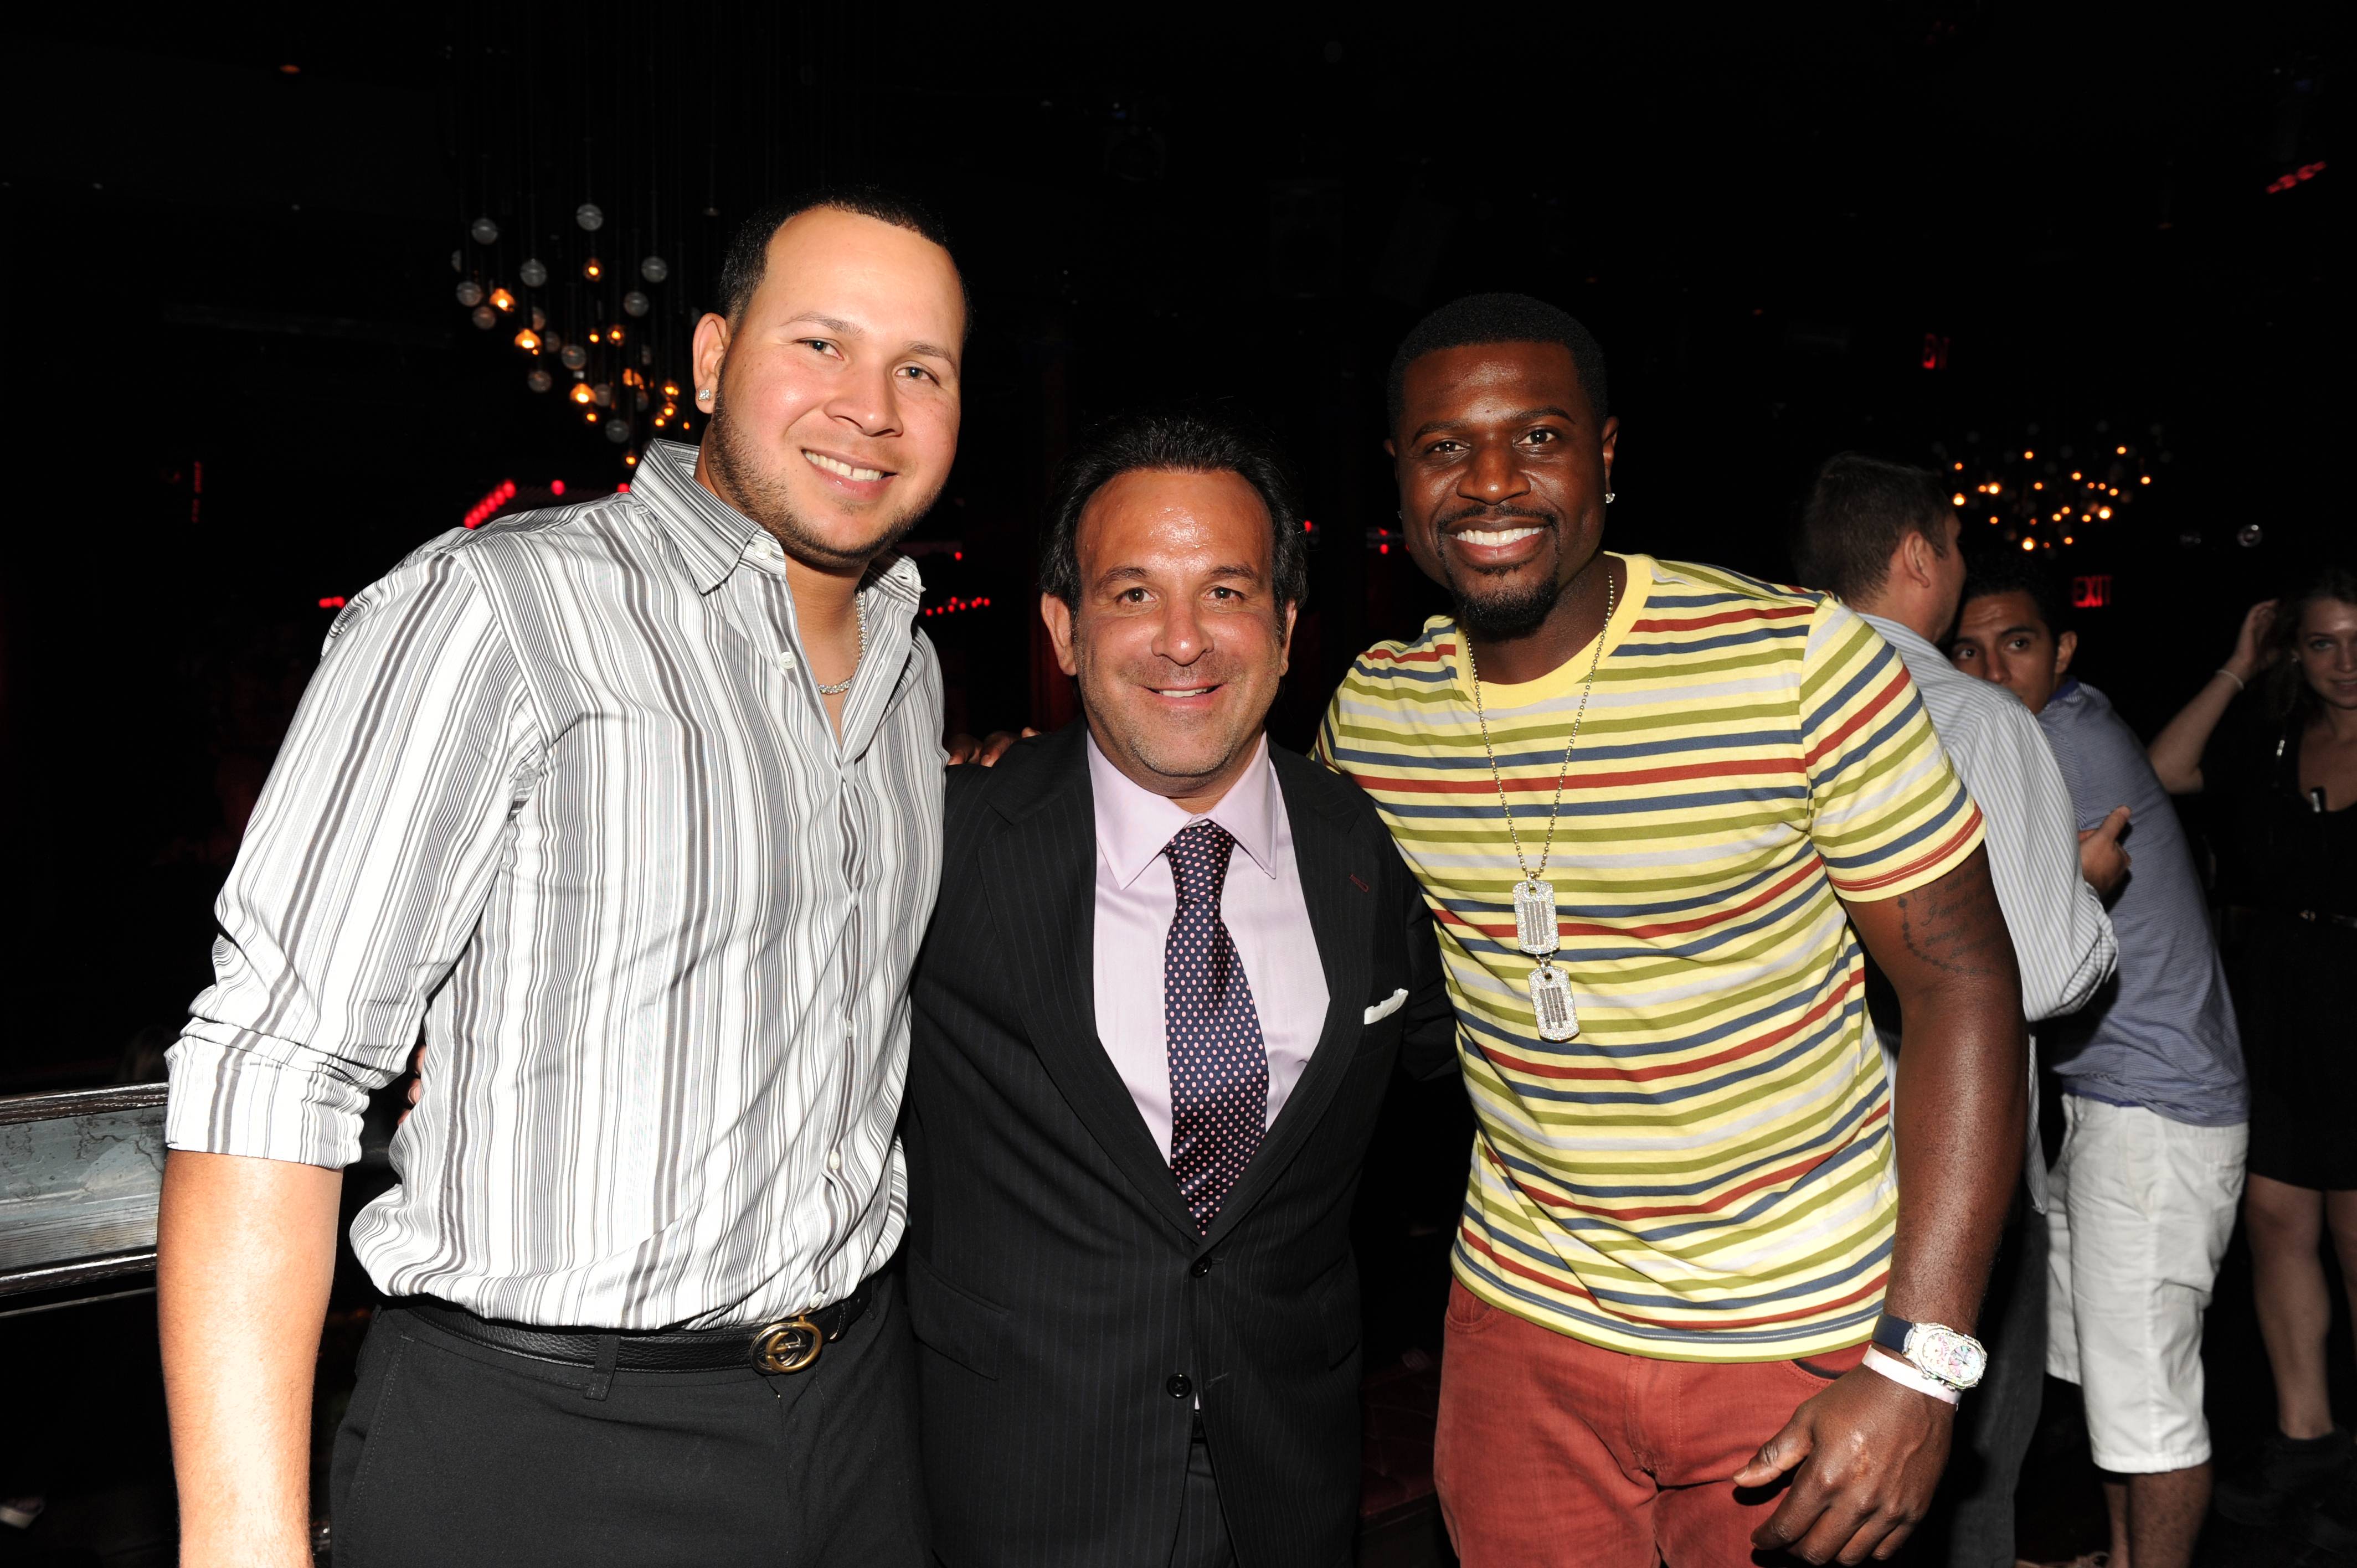 Jhonny Peralta, Sam Levinson and Brandon Phillips attend ACES All Stars 2013 at Marquee, on Sunday, July 14, 2013 in New York. (Photo by Evan Agnosti/Invision for ACES, Inc/AP Images)